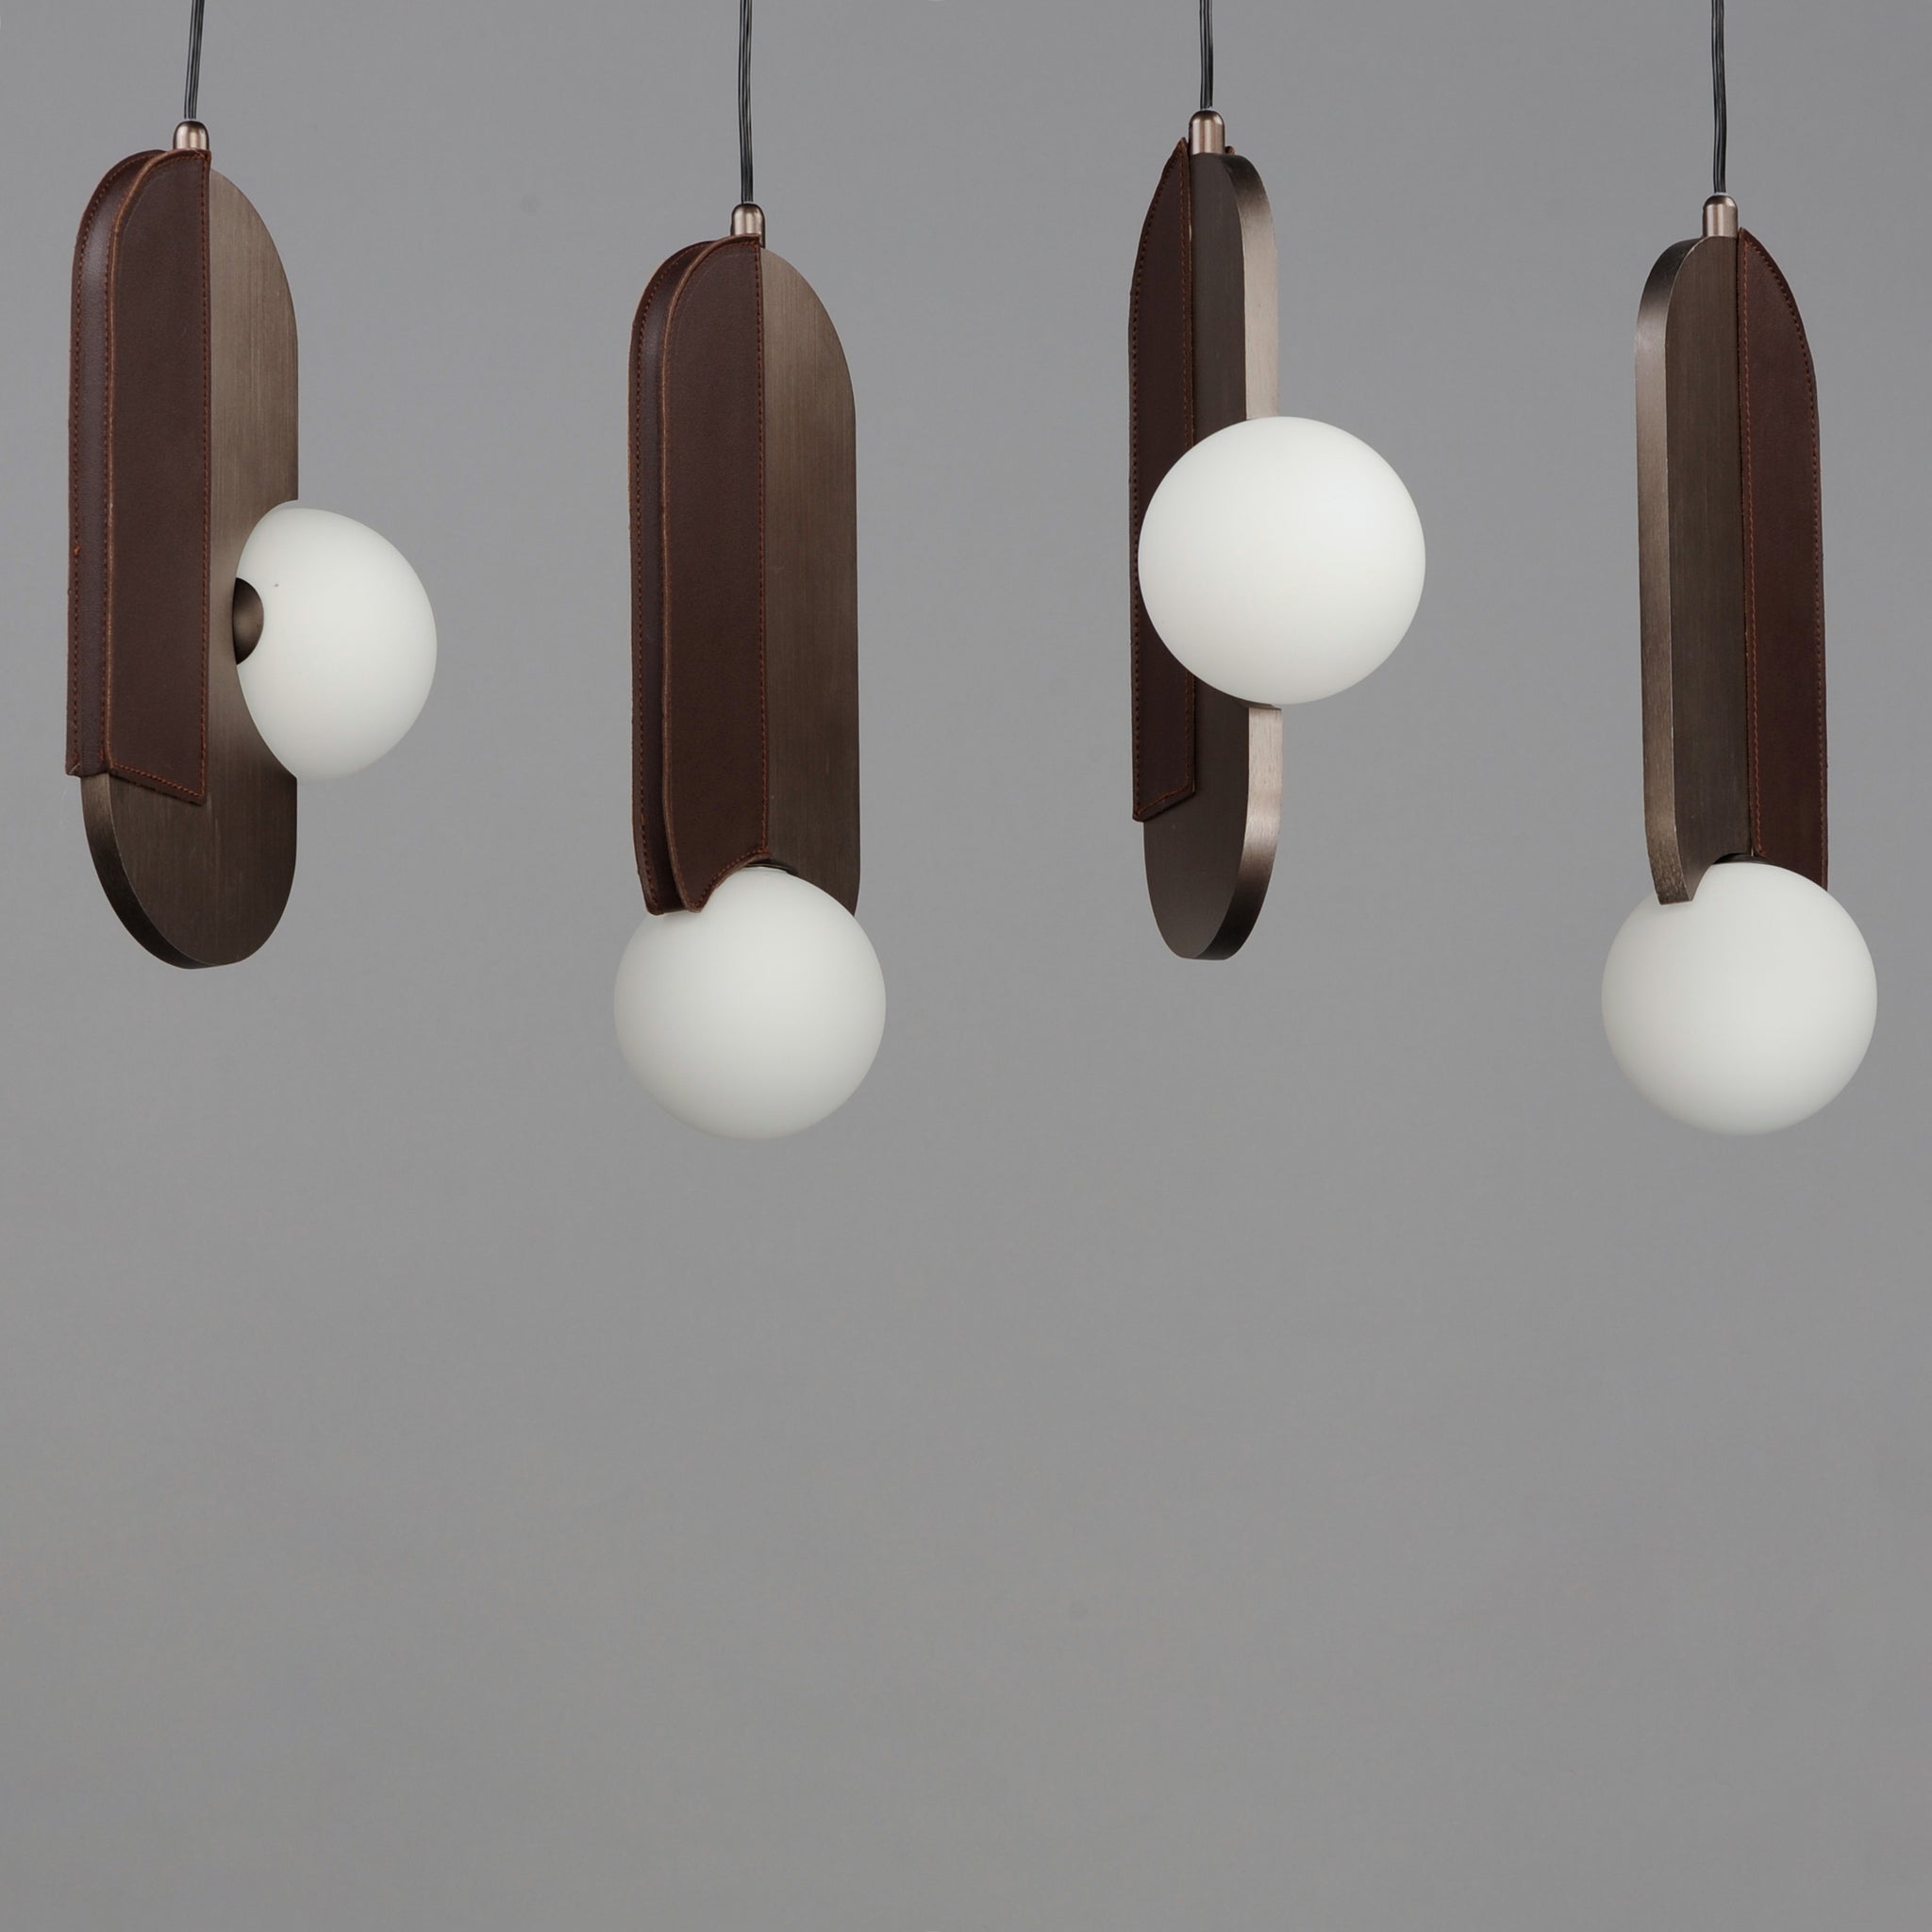 Stitched 5-Light Linear Suspension